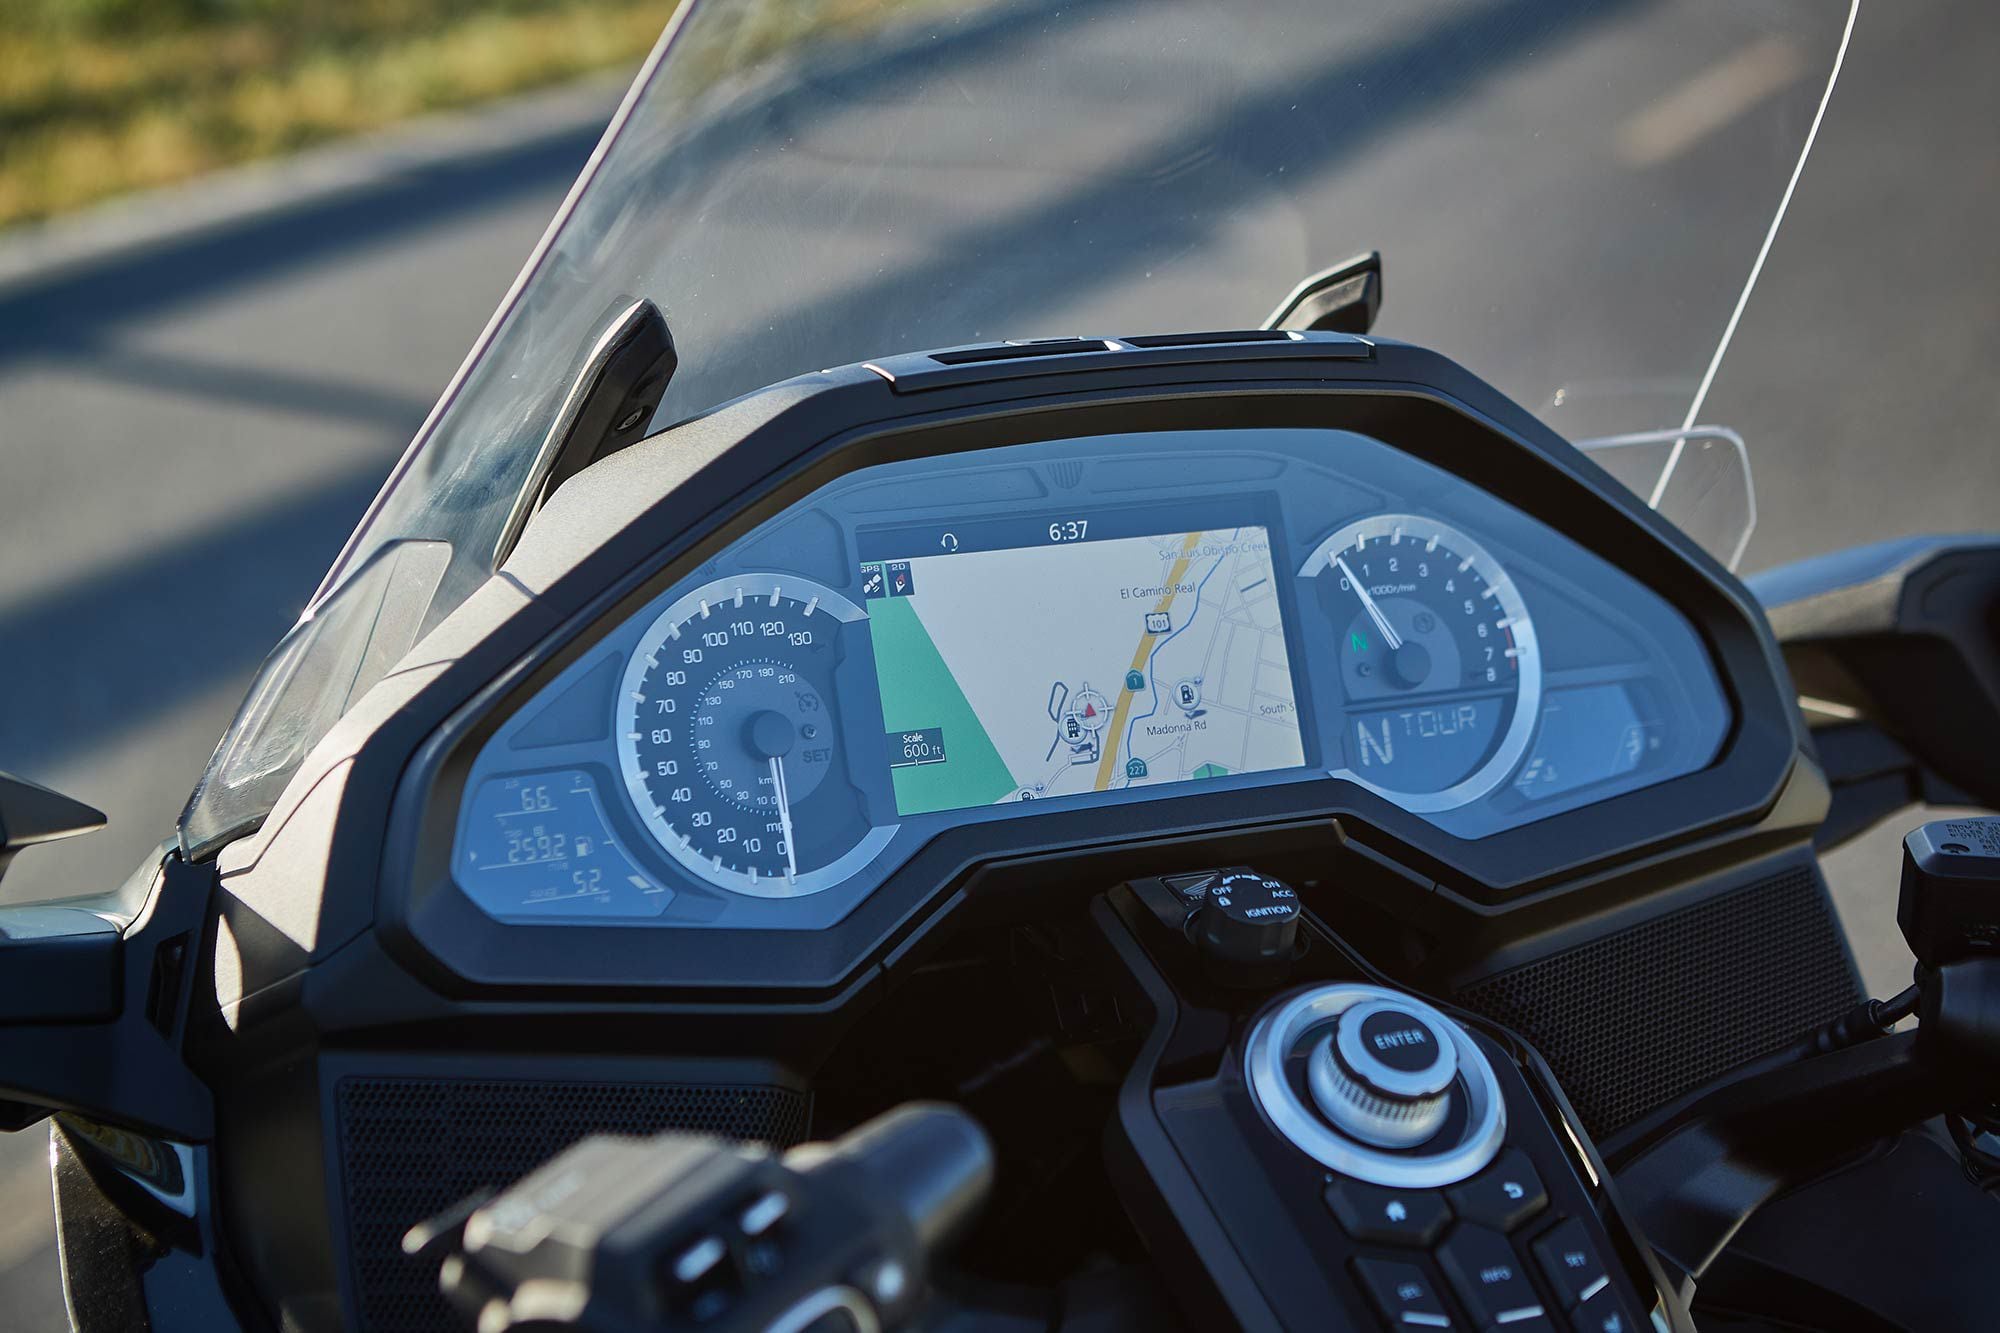 The Gold Wing’s dash display is tasteful combining both analog and digital instrumentation.